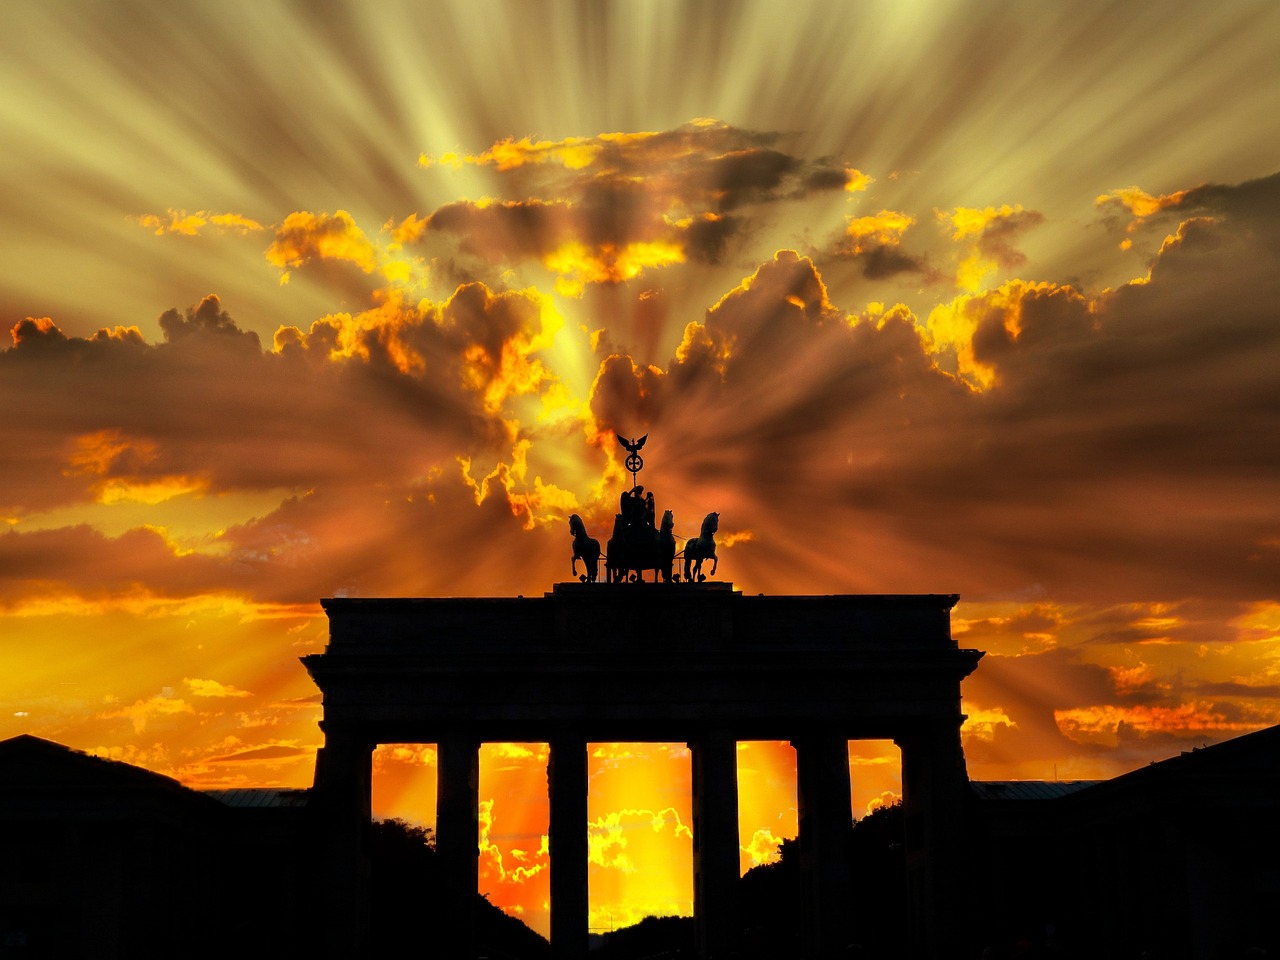 Historical, Artistic, and Culinary 2-Day Berlin Itinerary with Nightlife